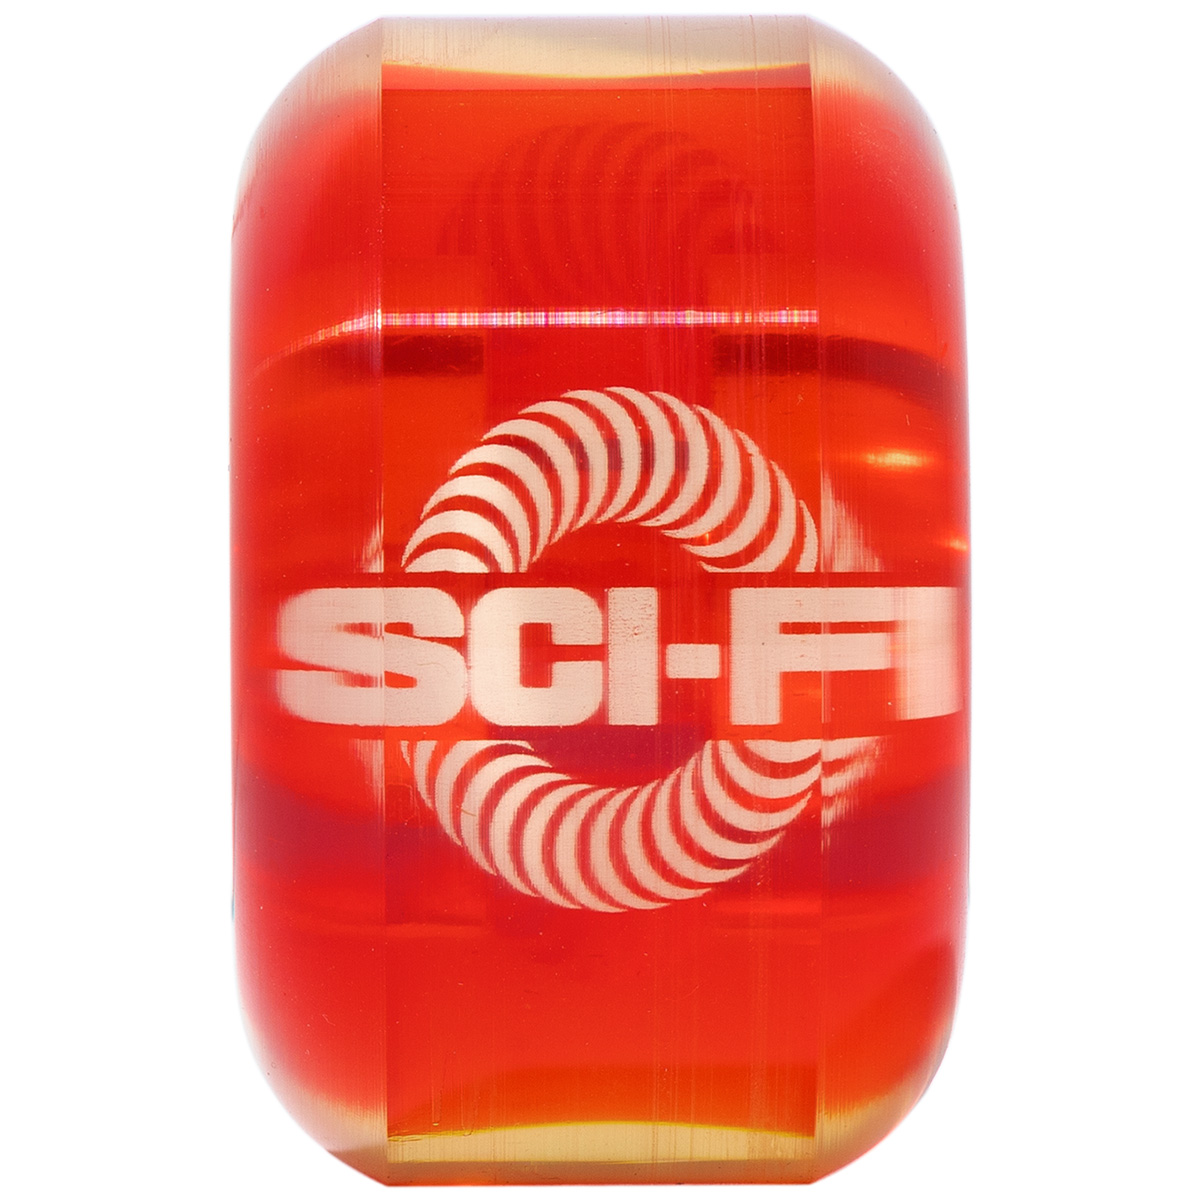 Spitfire x Sci-Fi Fantasy Sapphires Wheels Red 58mm